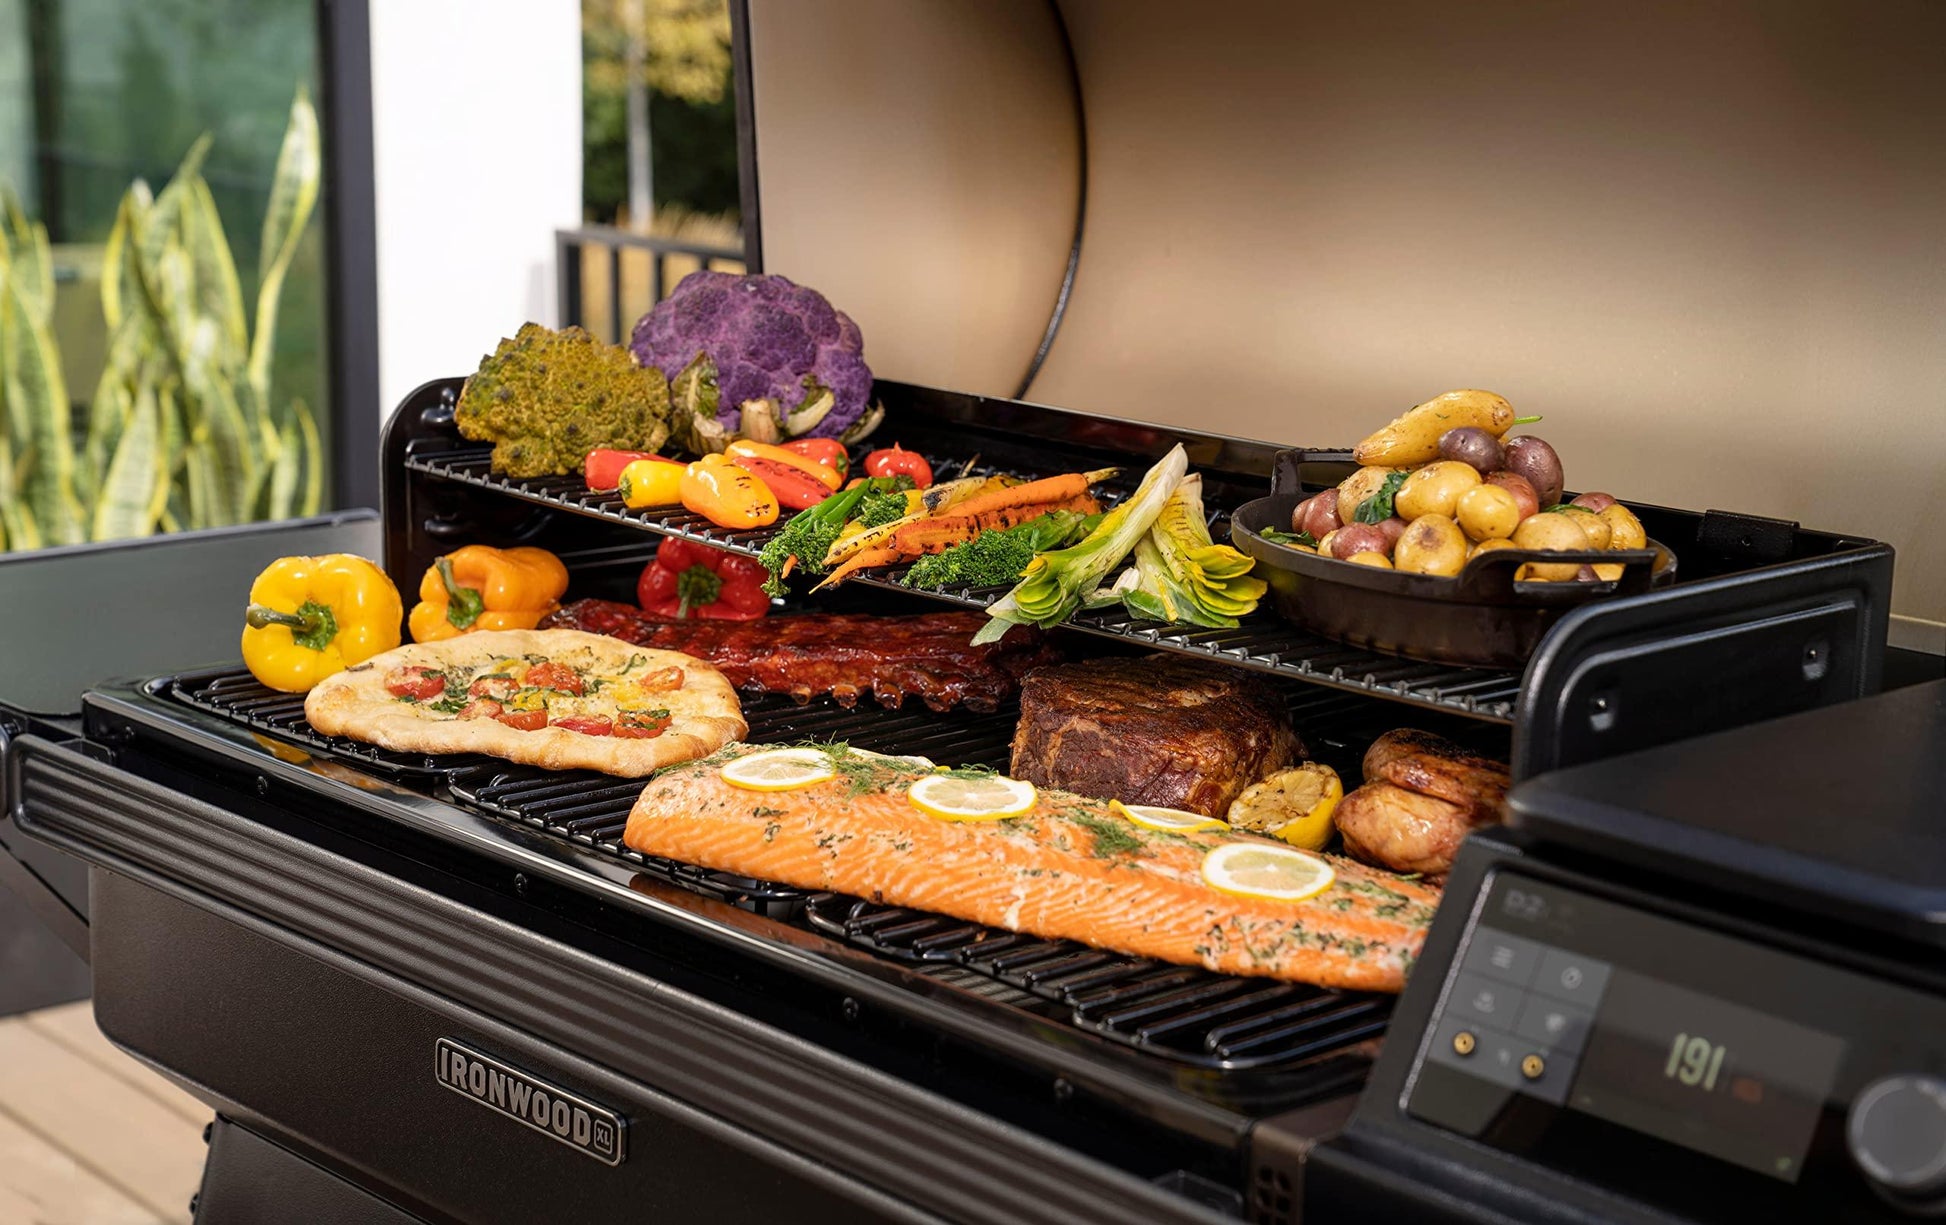 Traeger Ironwood XL Wood Pellet Grill and Smoker with WiFi and App Connectivity,Black - CookCave